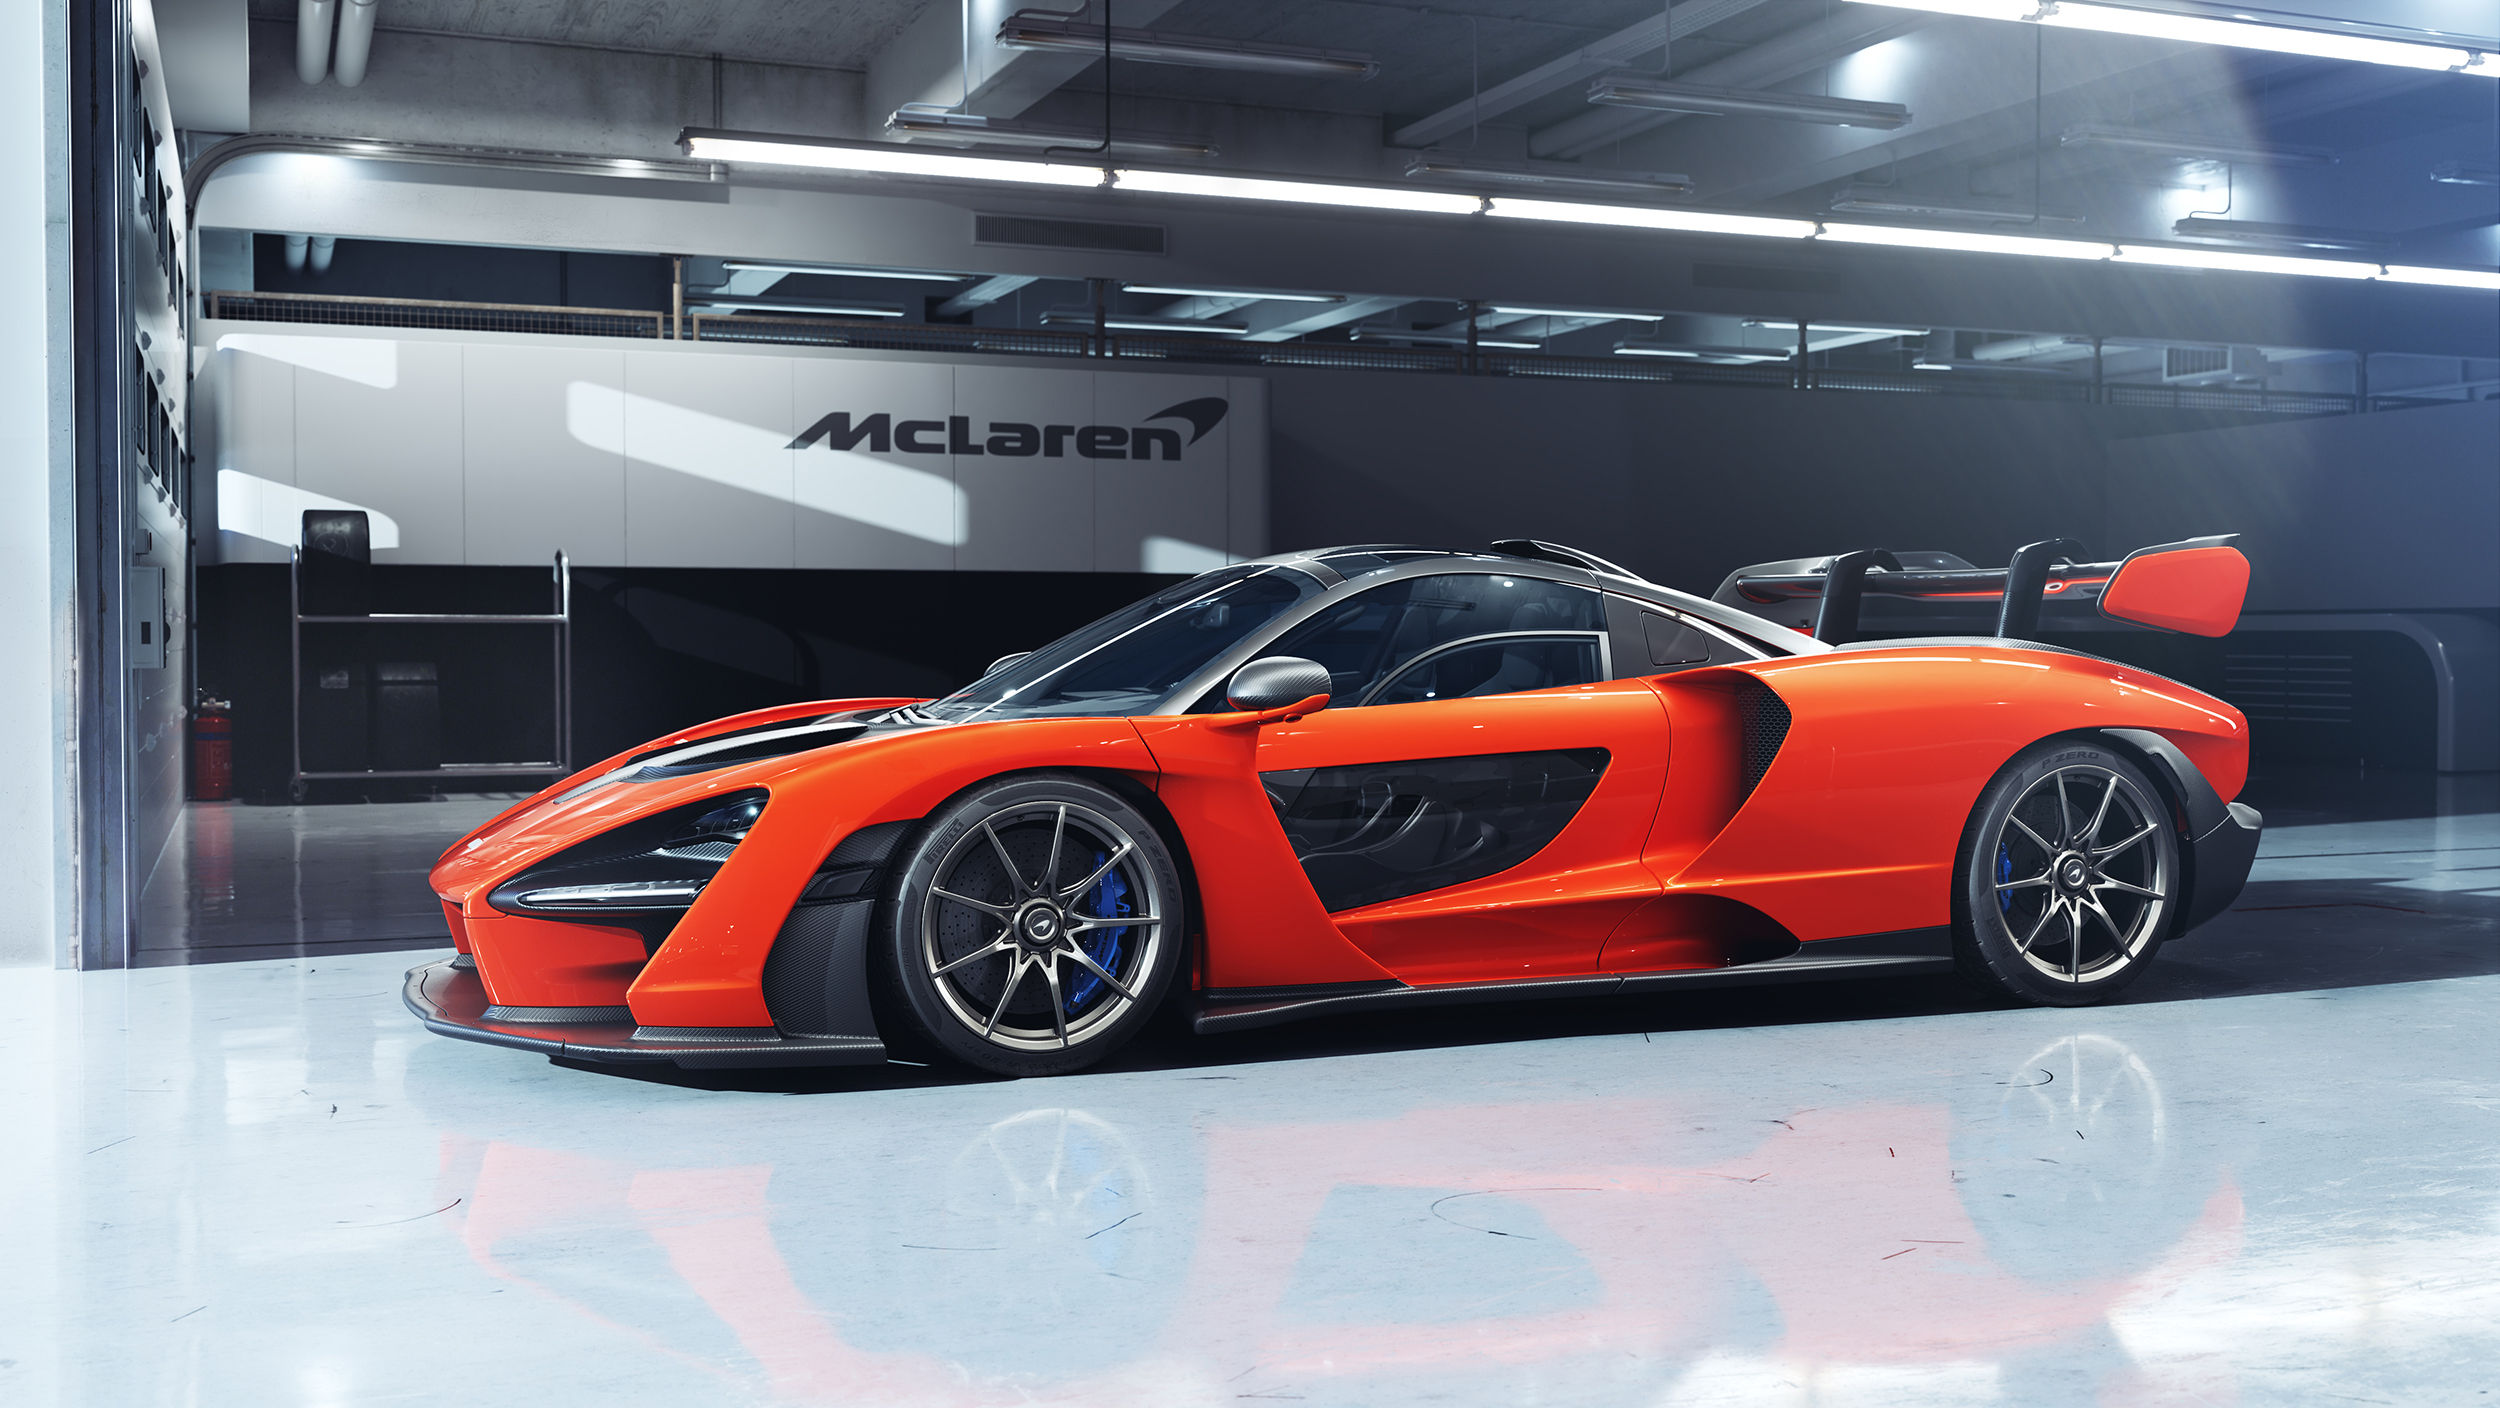 Don’t blink — the new McLaren Senna will have your life if you did